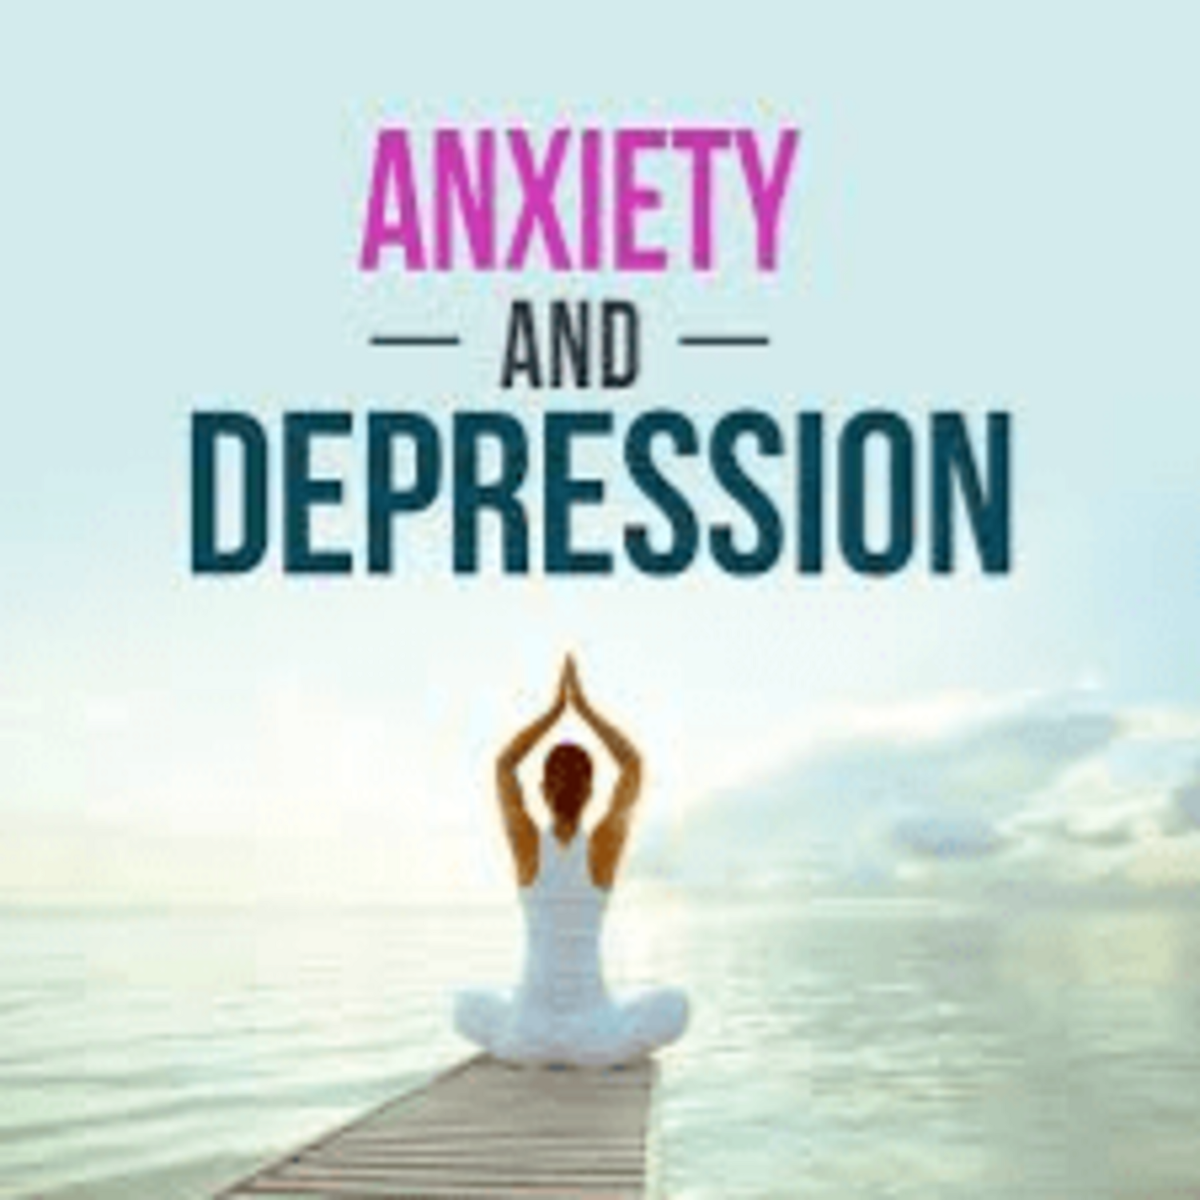 HOW TO OVERCOME DEPRESSION AND ANXIETY